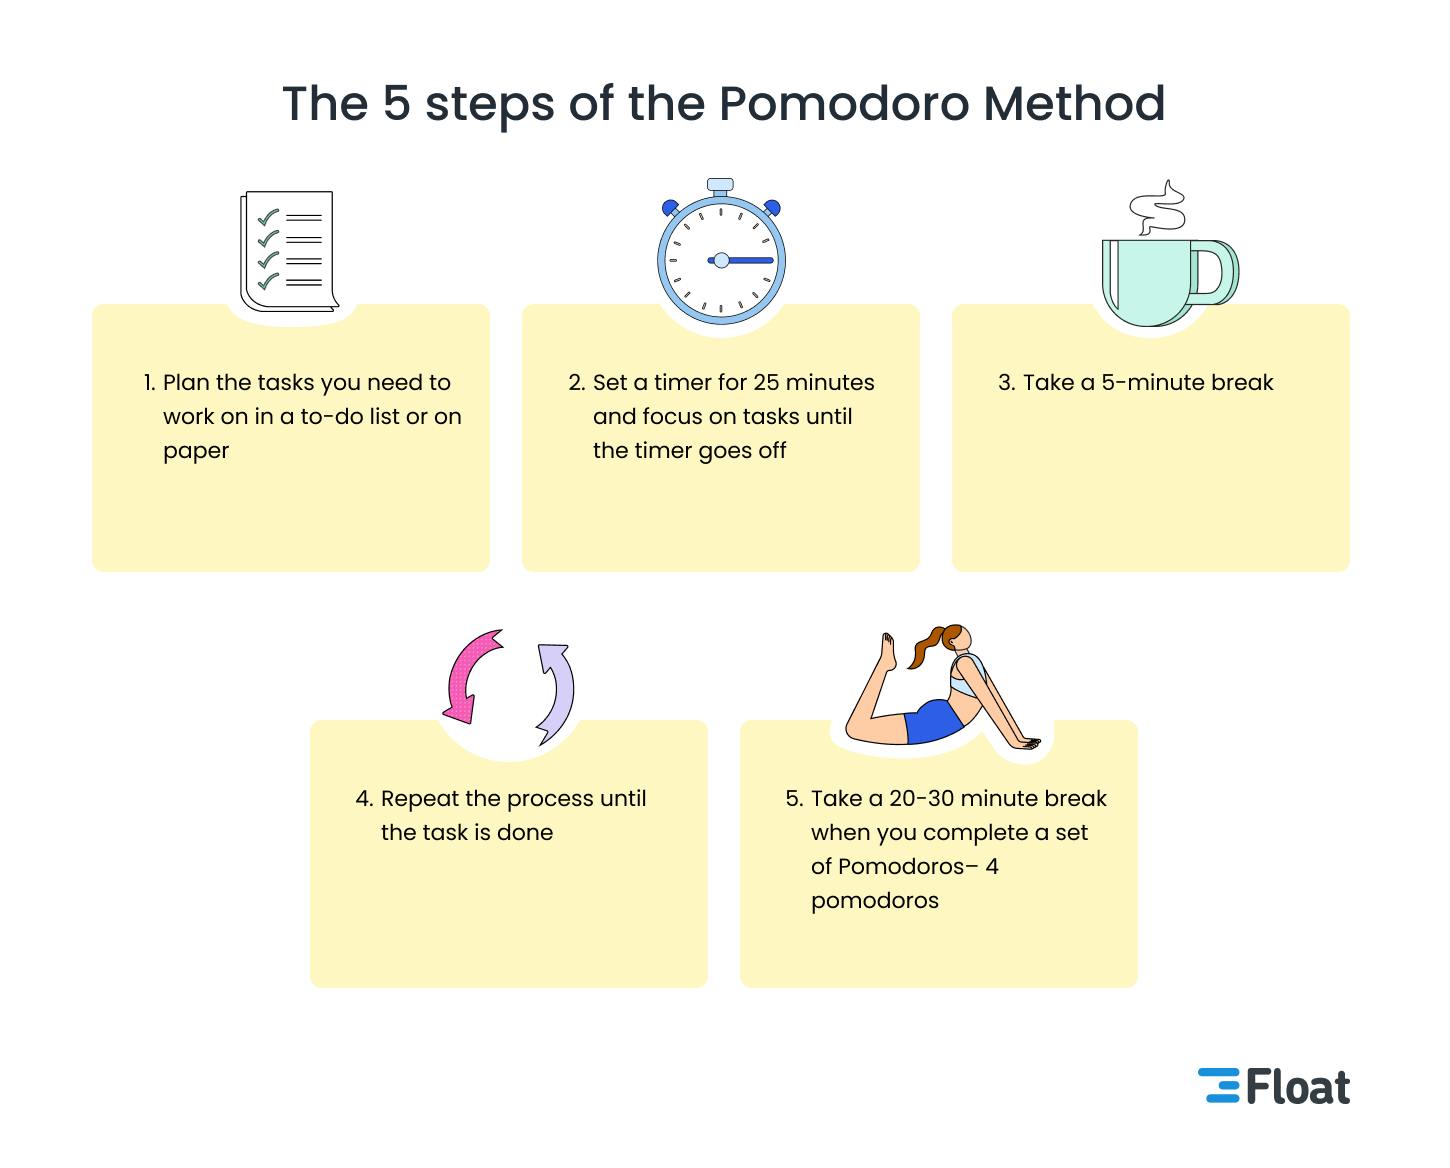 The Pomodoro Technique: How It Can Help You Achieve Focus in a Distracted  World